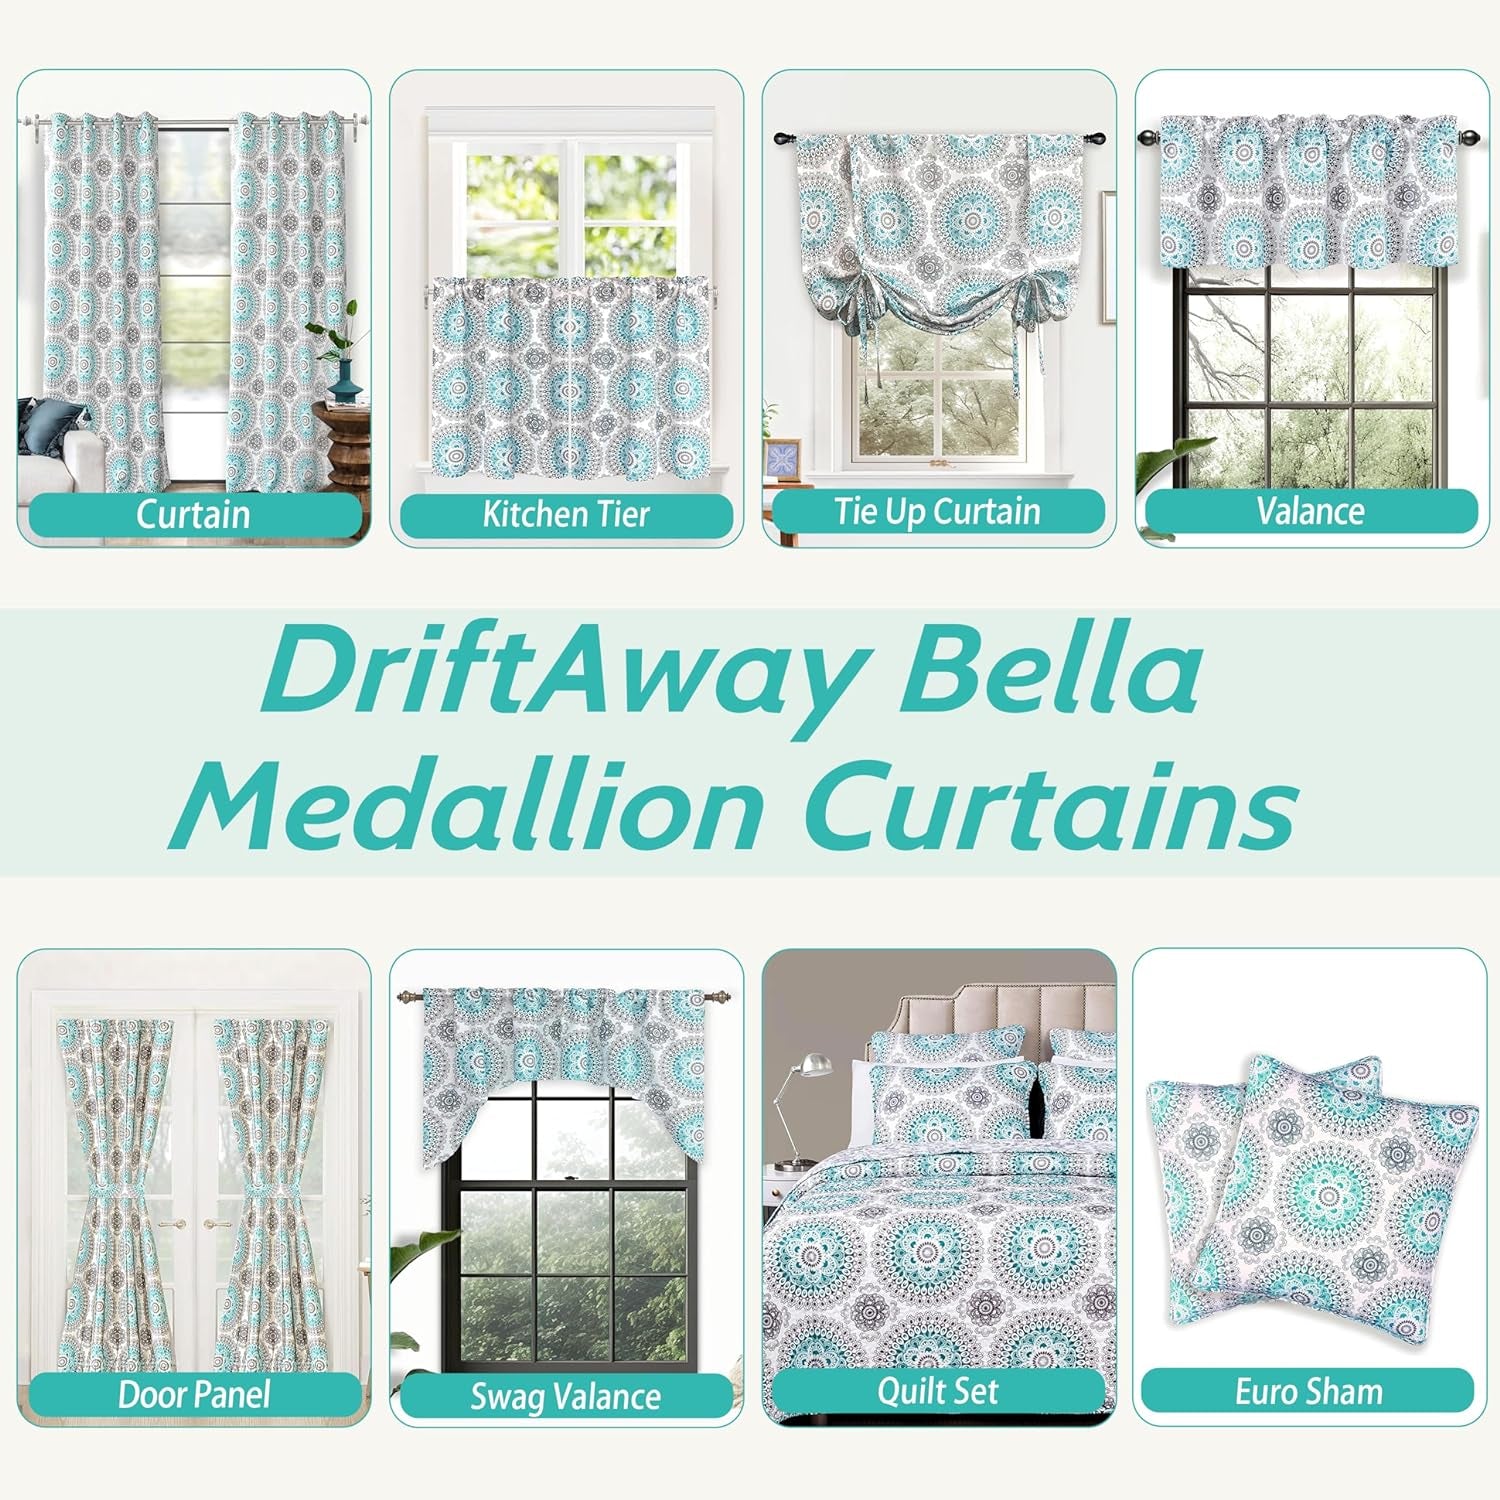 Driftaway Curtains for Bedroom Room Darkening Curtain 25 Inch by 72 Inch Medallion Drapes for French Door Windows Boho Damask Pattern Sidelight Curtain for Front Door Single Panel Aqua and Gray  DriftAway   